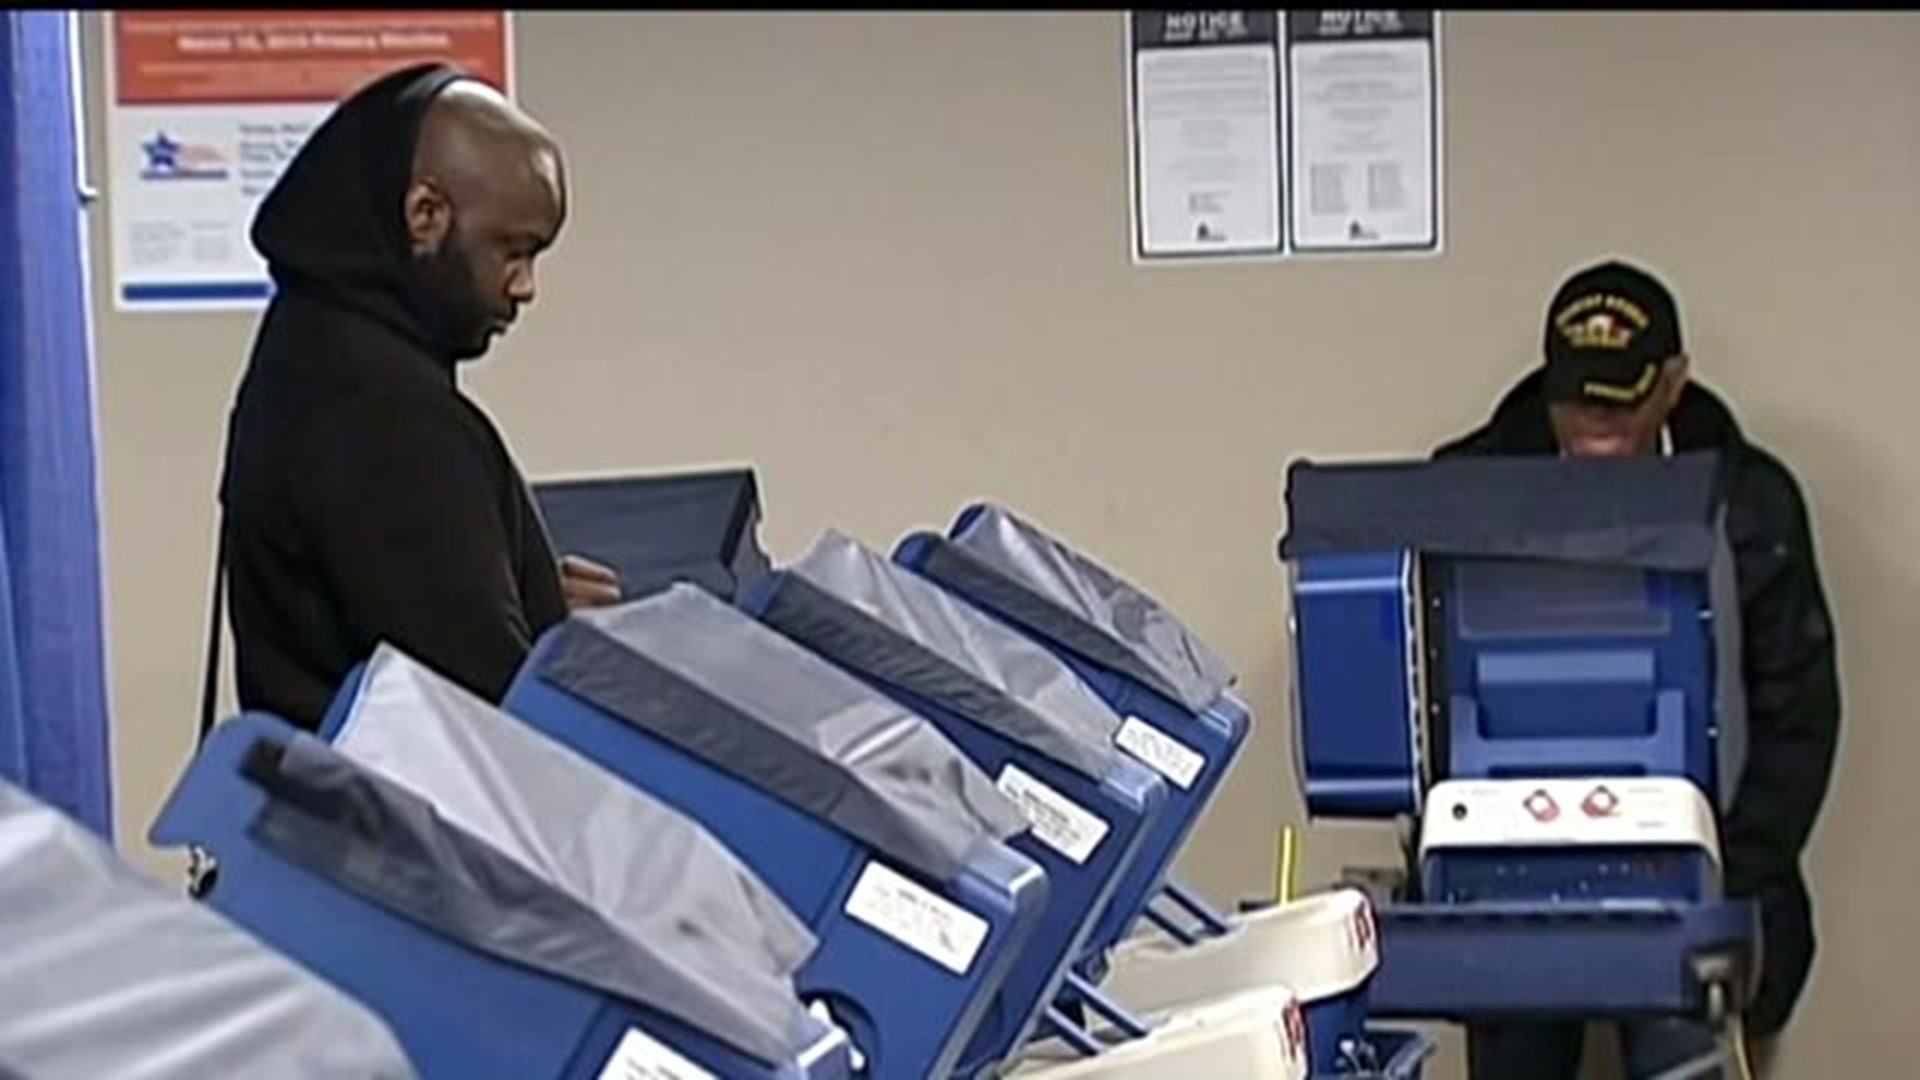 Primary voter registration ends today